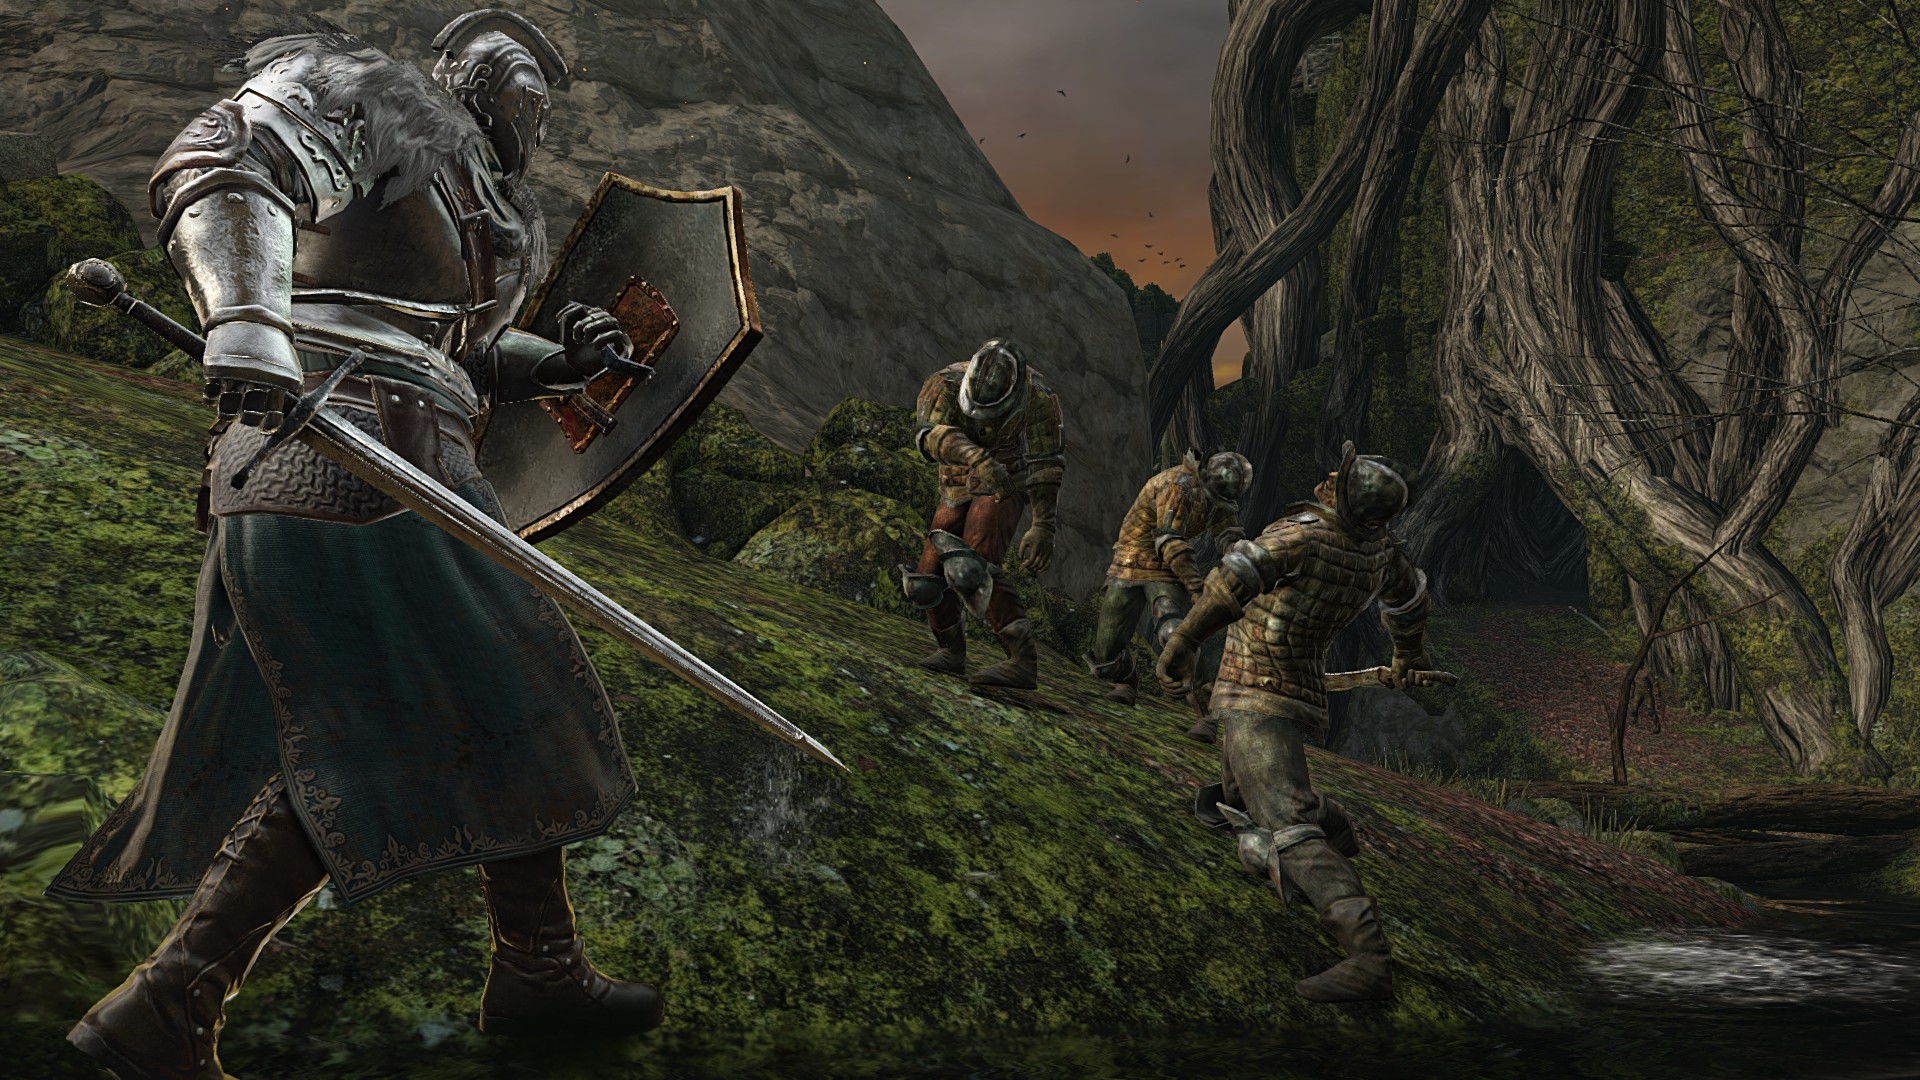 Dark Souls II System Requirements: Can You Run It?